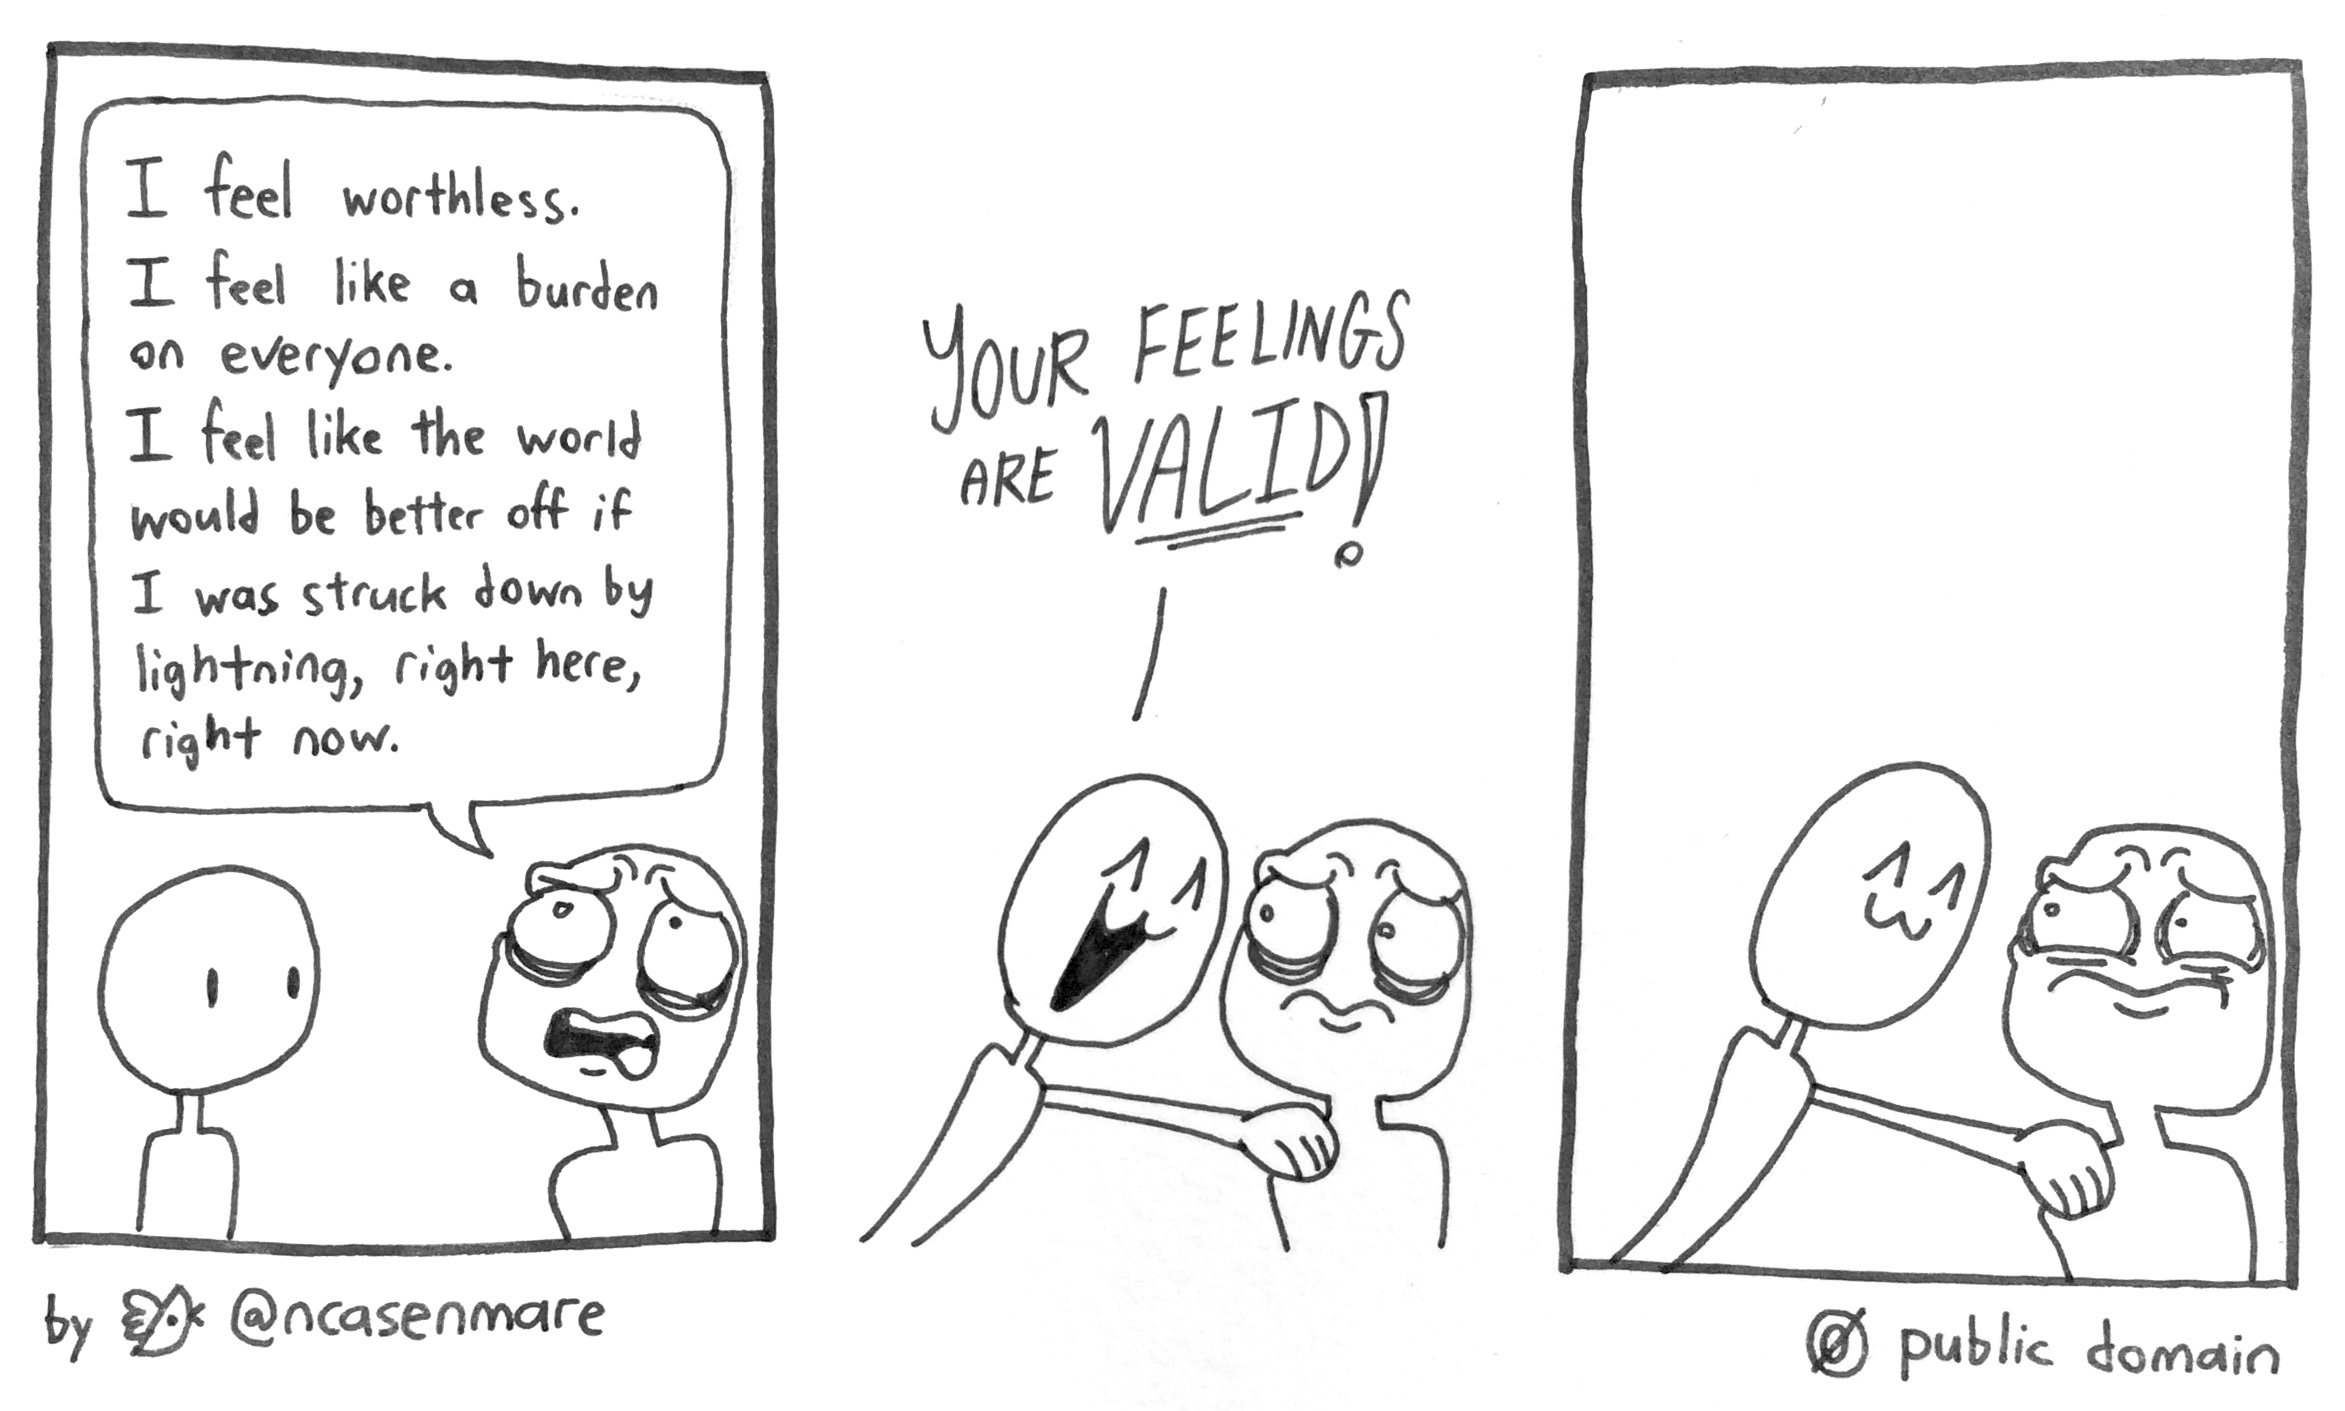 Three-panel comic. Panel 1: Someone says "I feel like a burden, I feel I deserve to die". Panel 2: Other person says with a cheer, "Your feelings are VALID!" Panel 3: Awkward silence.